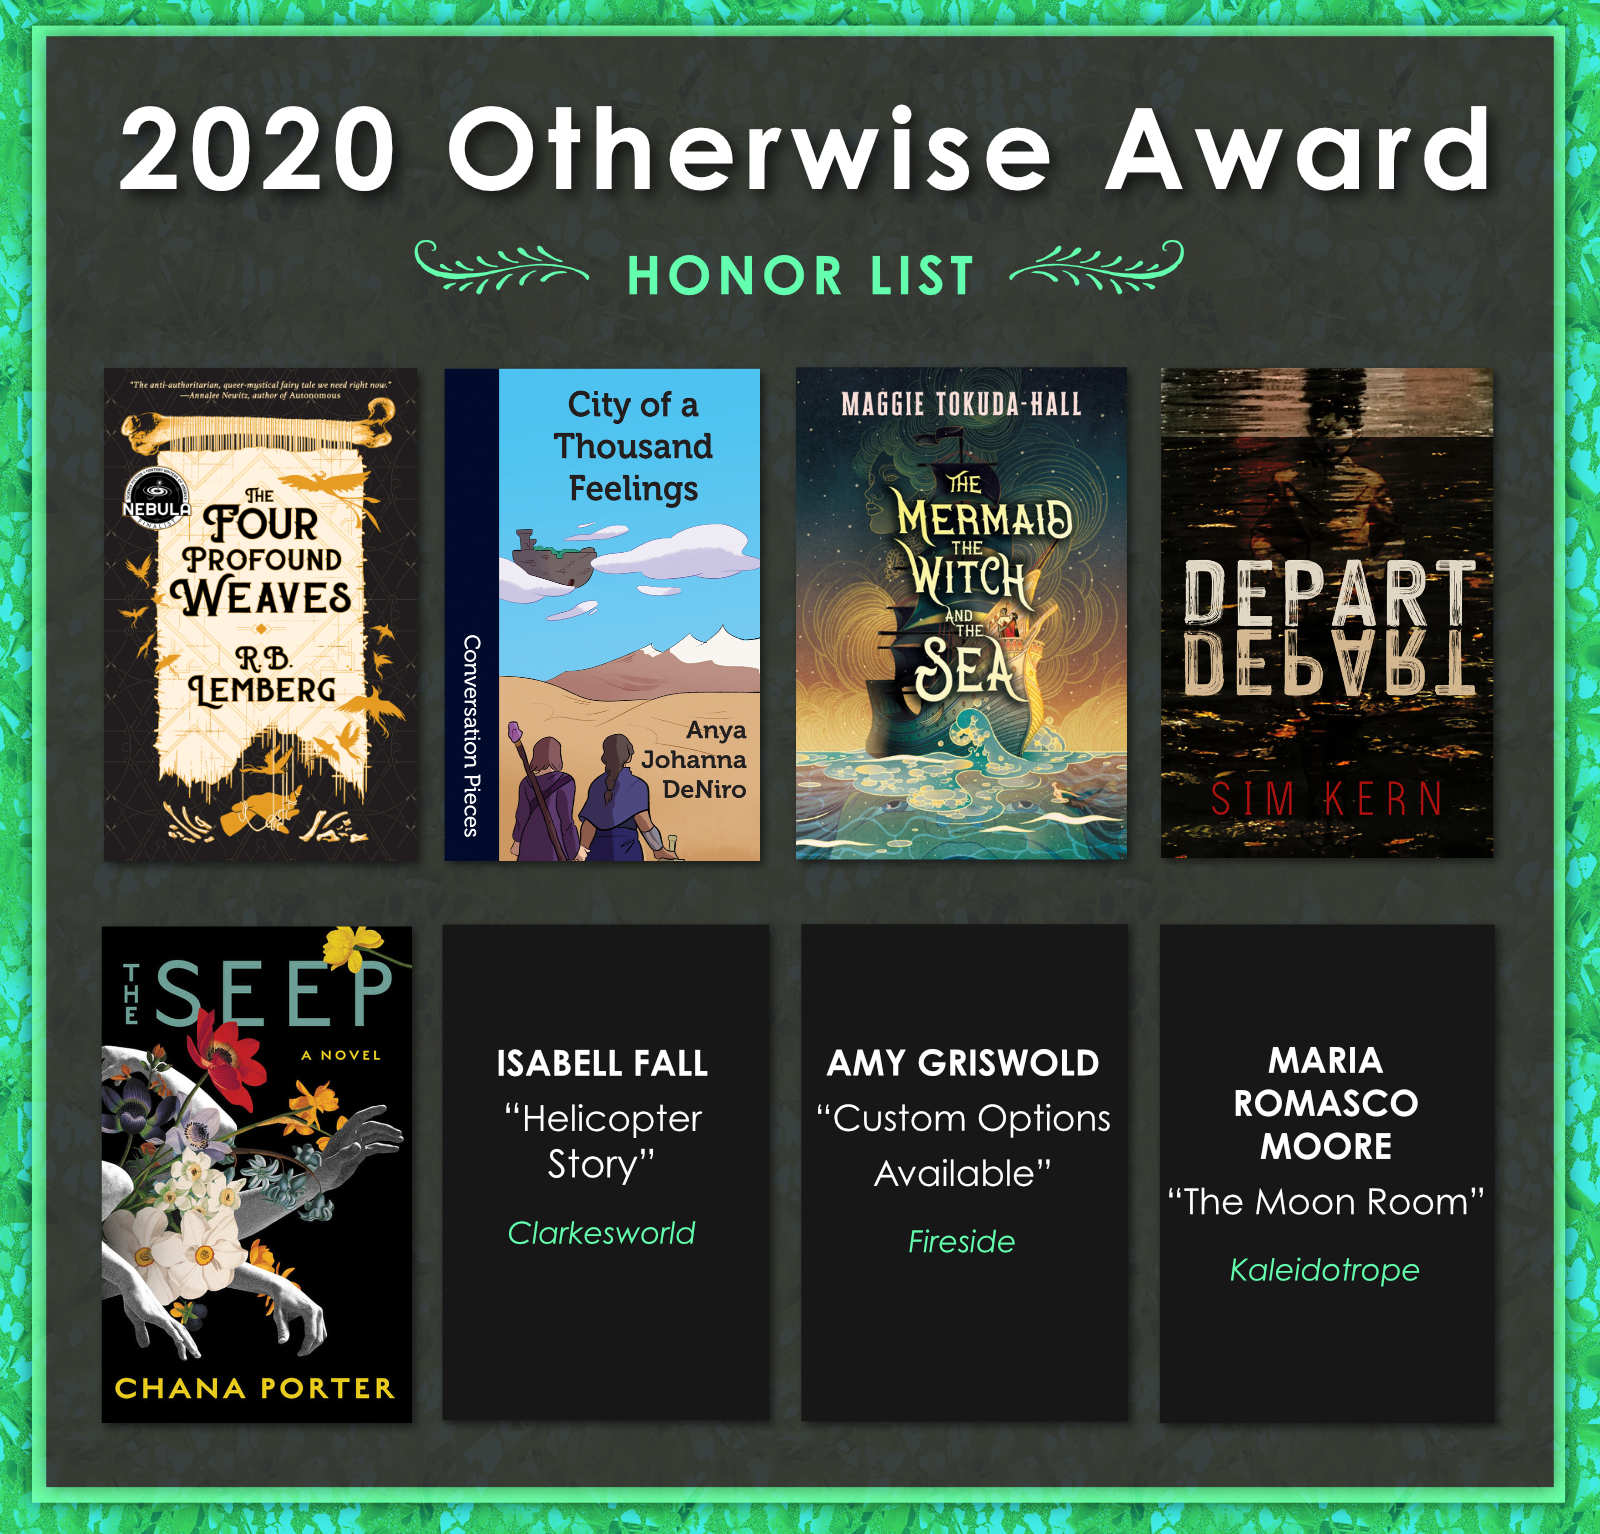 2020 Otherwise Award Honor List